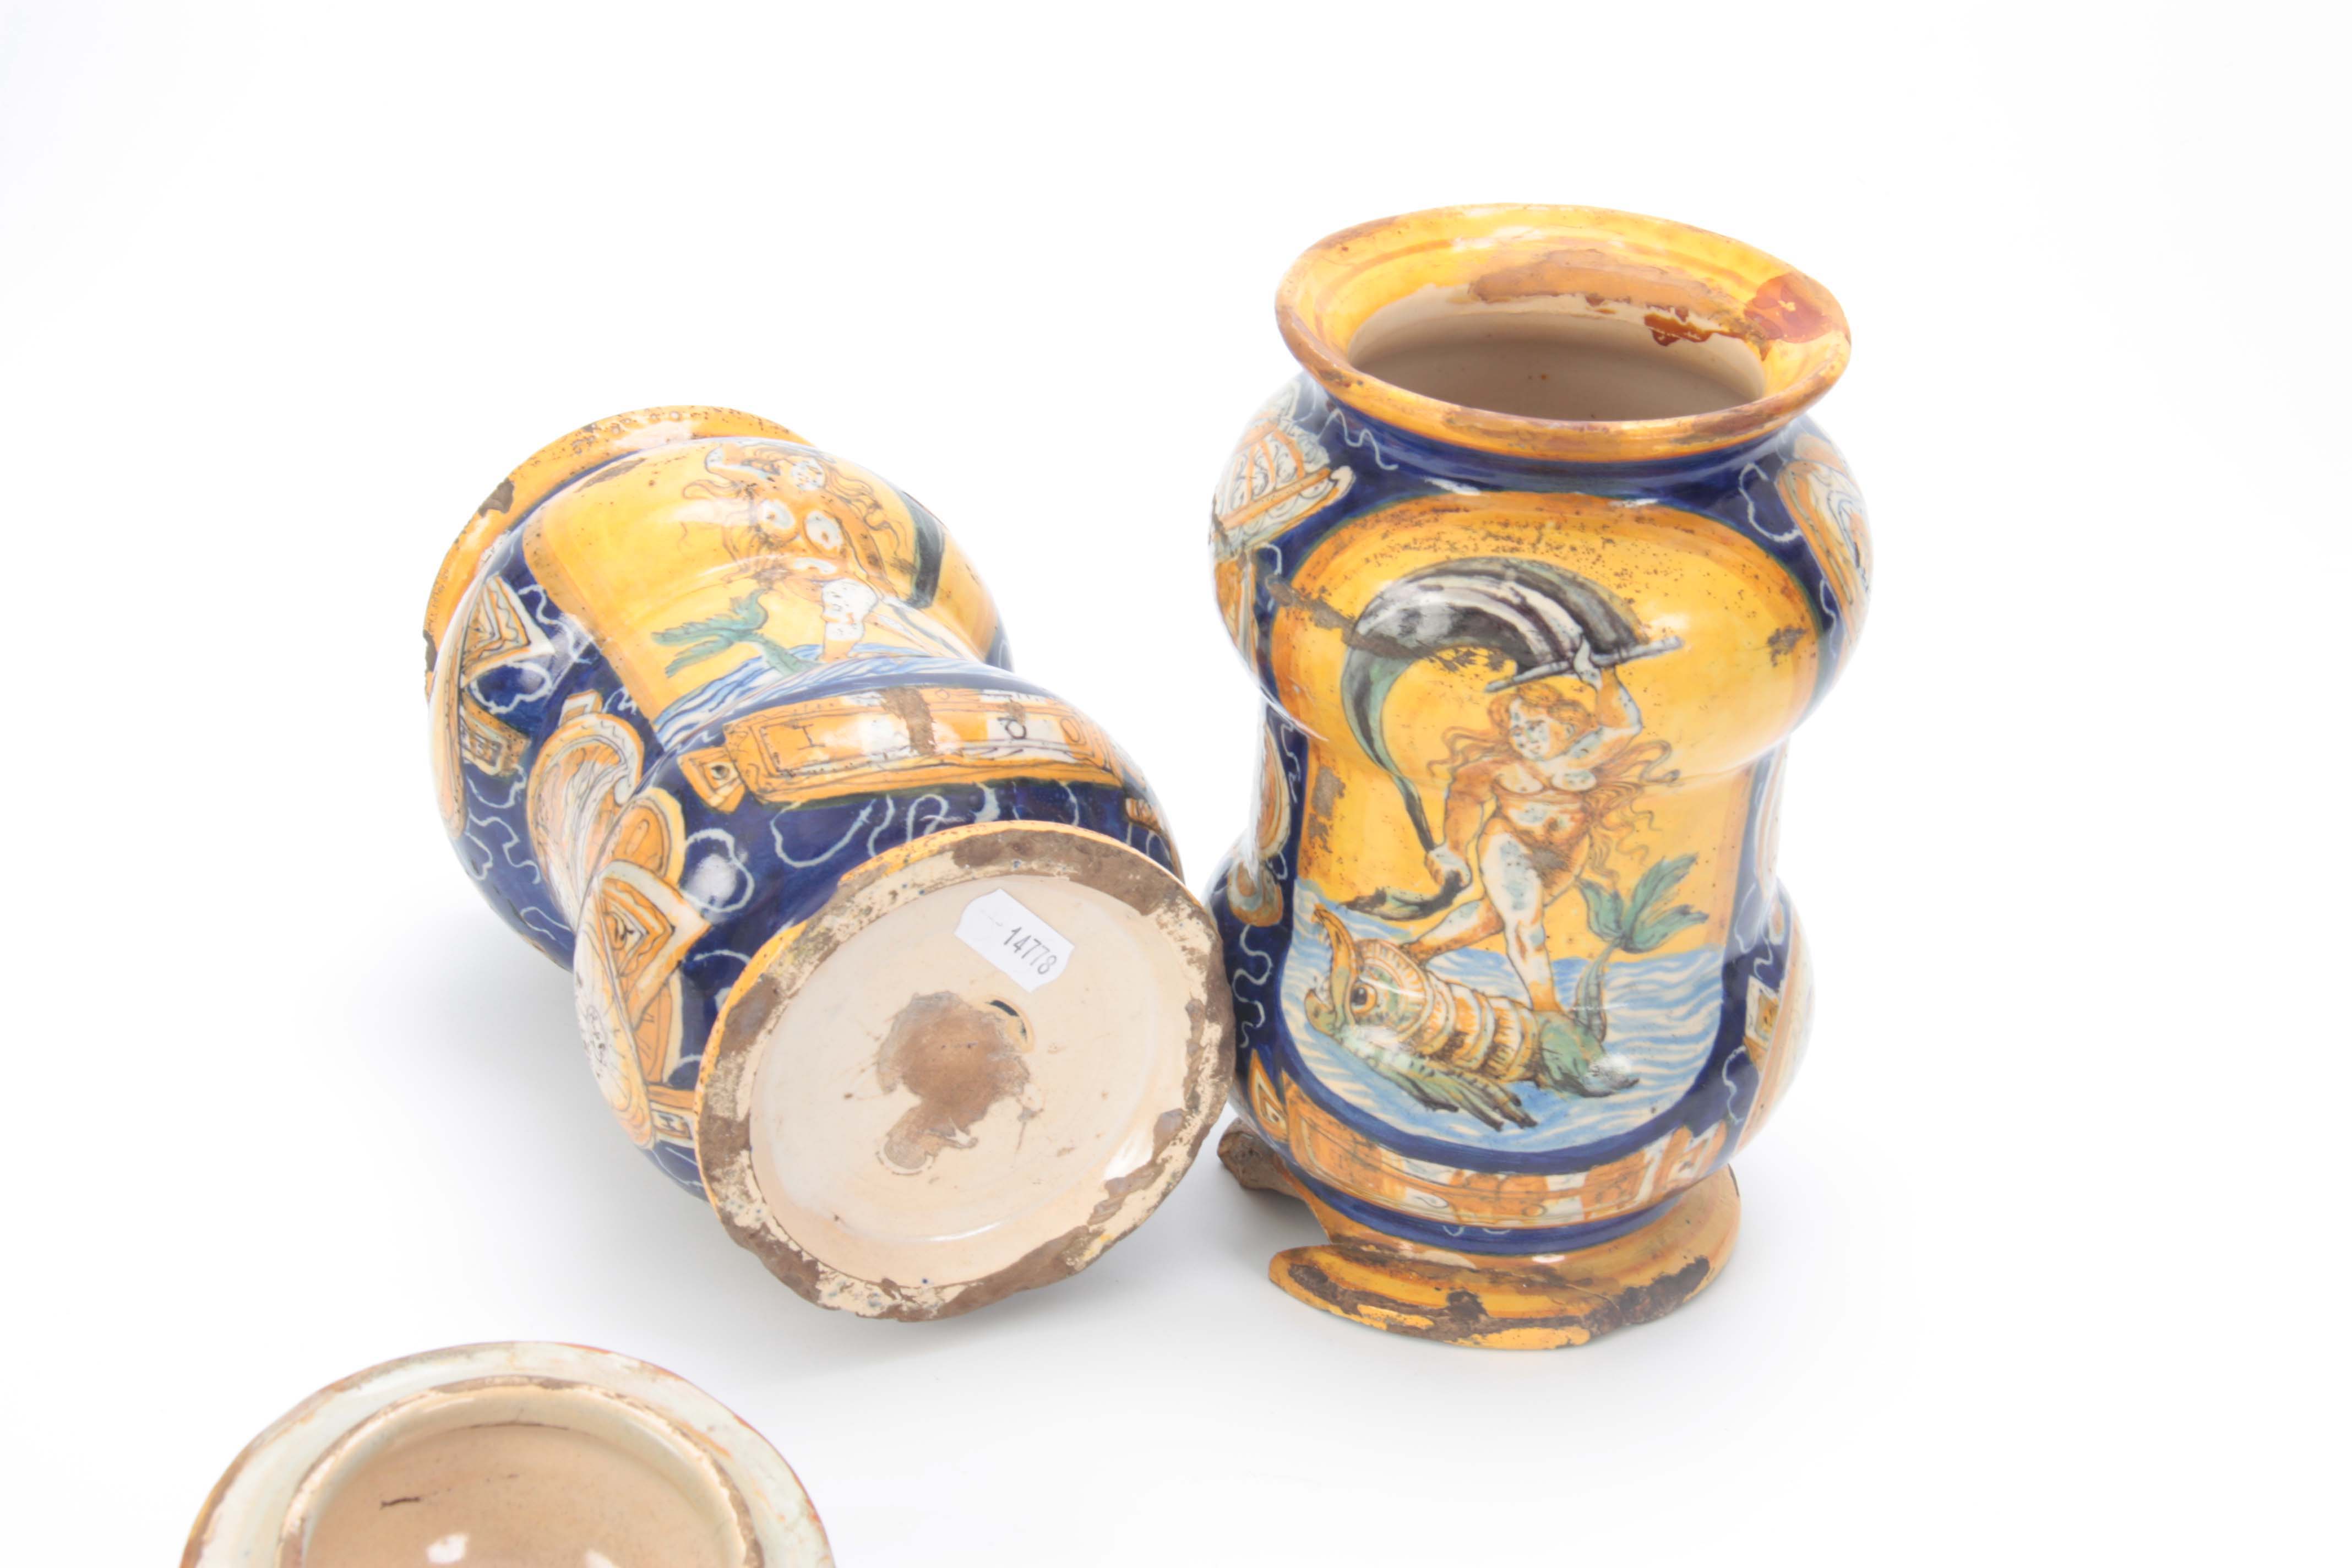 A PAIR OF CASTEL DURANTE MAIOLICA ALBARELLI DATED 1580 each painted with Venus riding a dolphin - Image 7 of 7